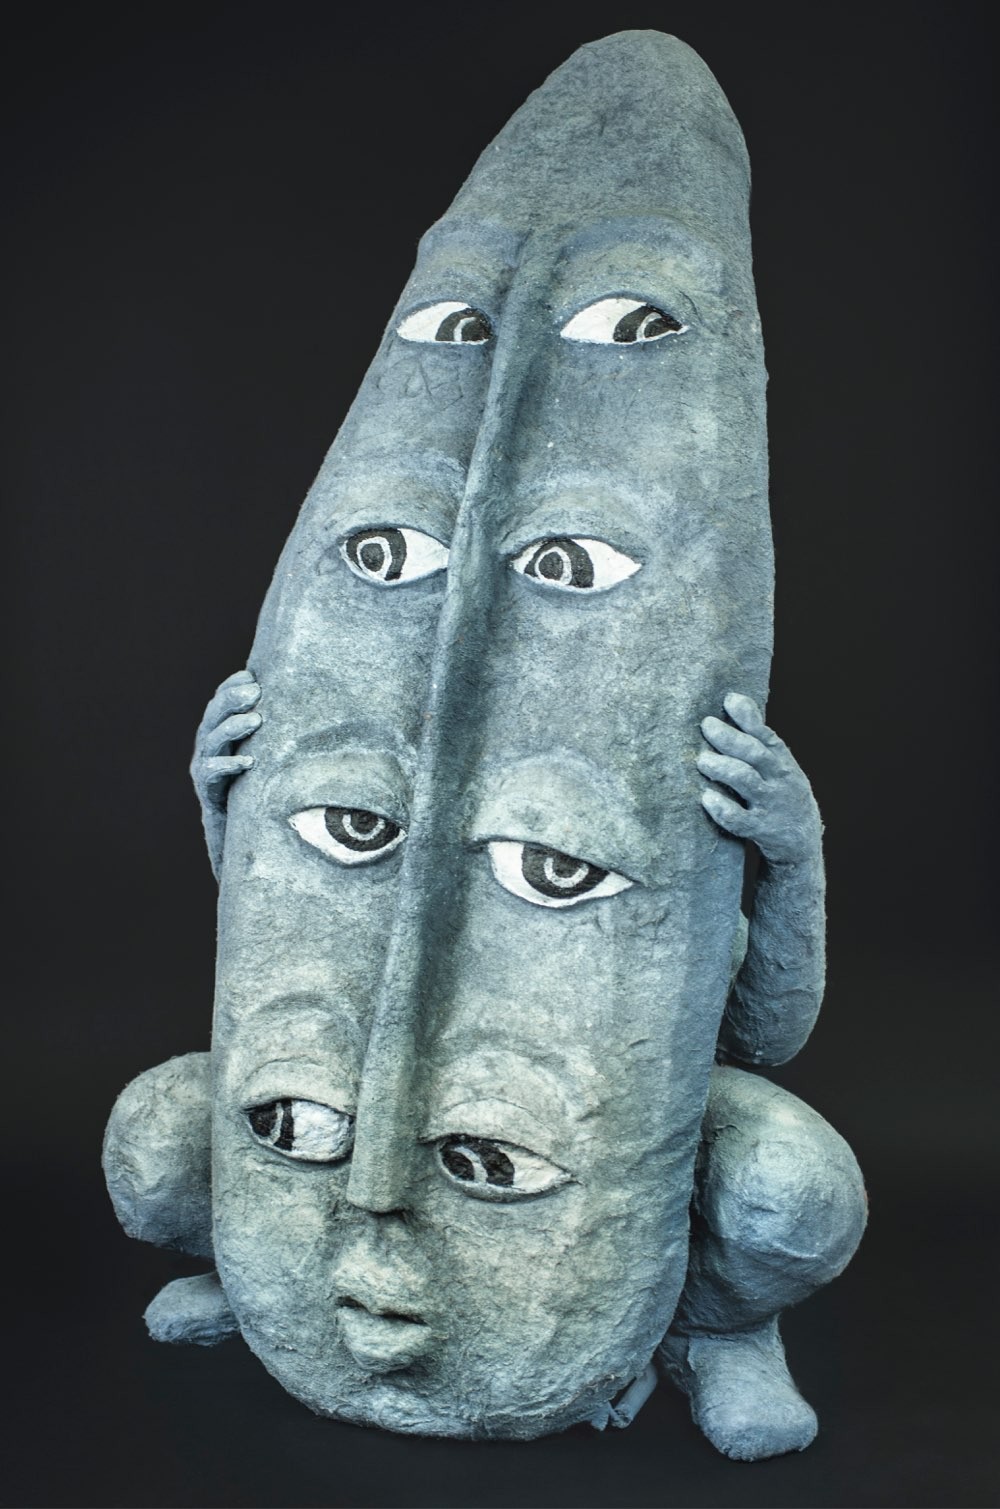 En face, a grey female figure hiding behind a grey shield with four pairs of eyes